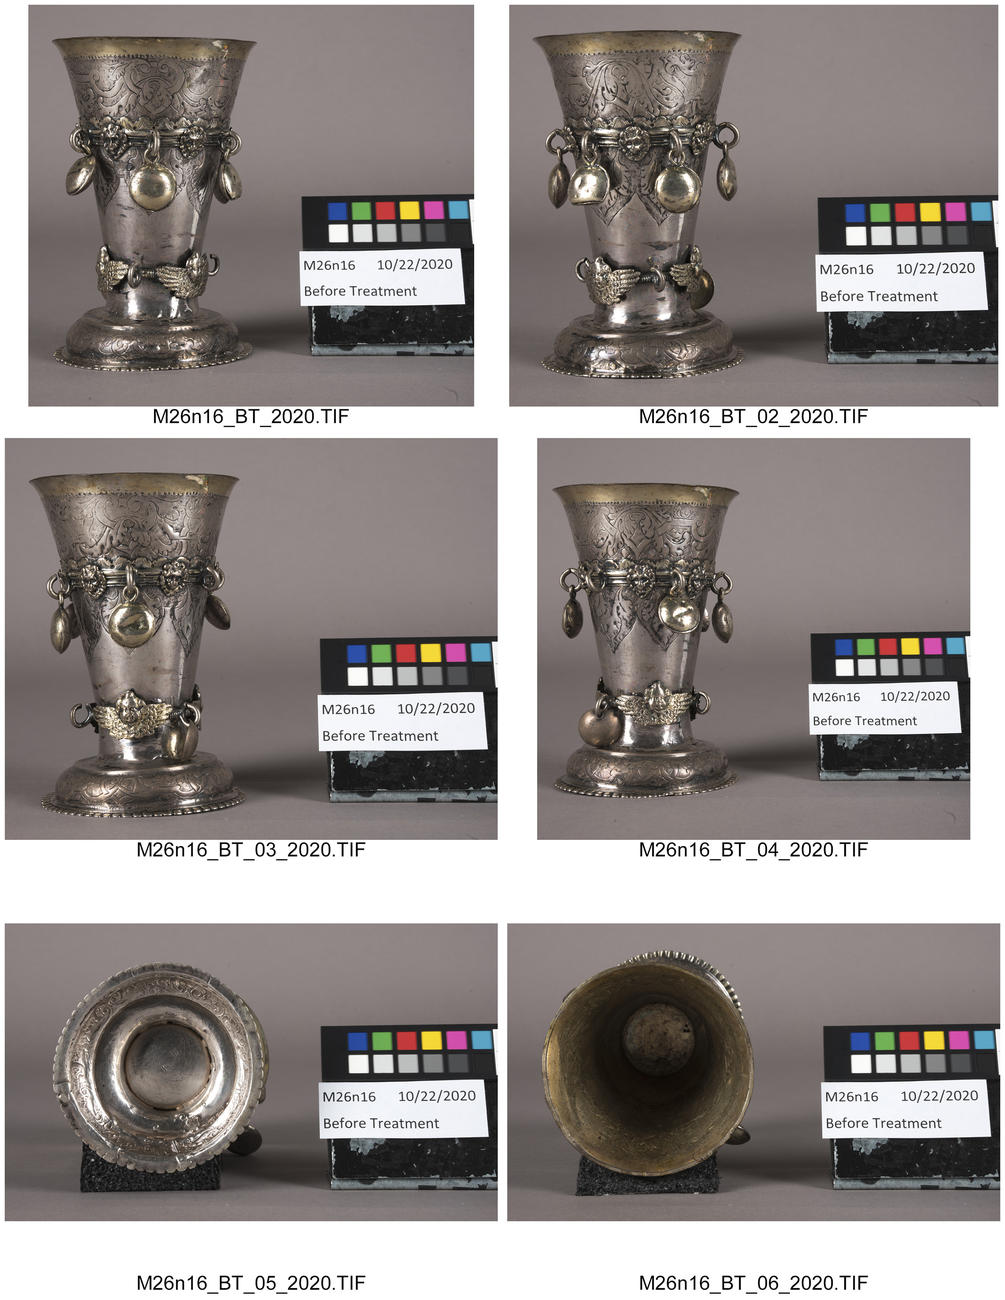 Six images of a silver cup in different positions.